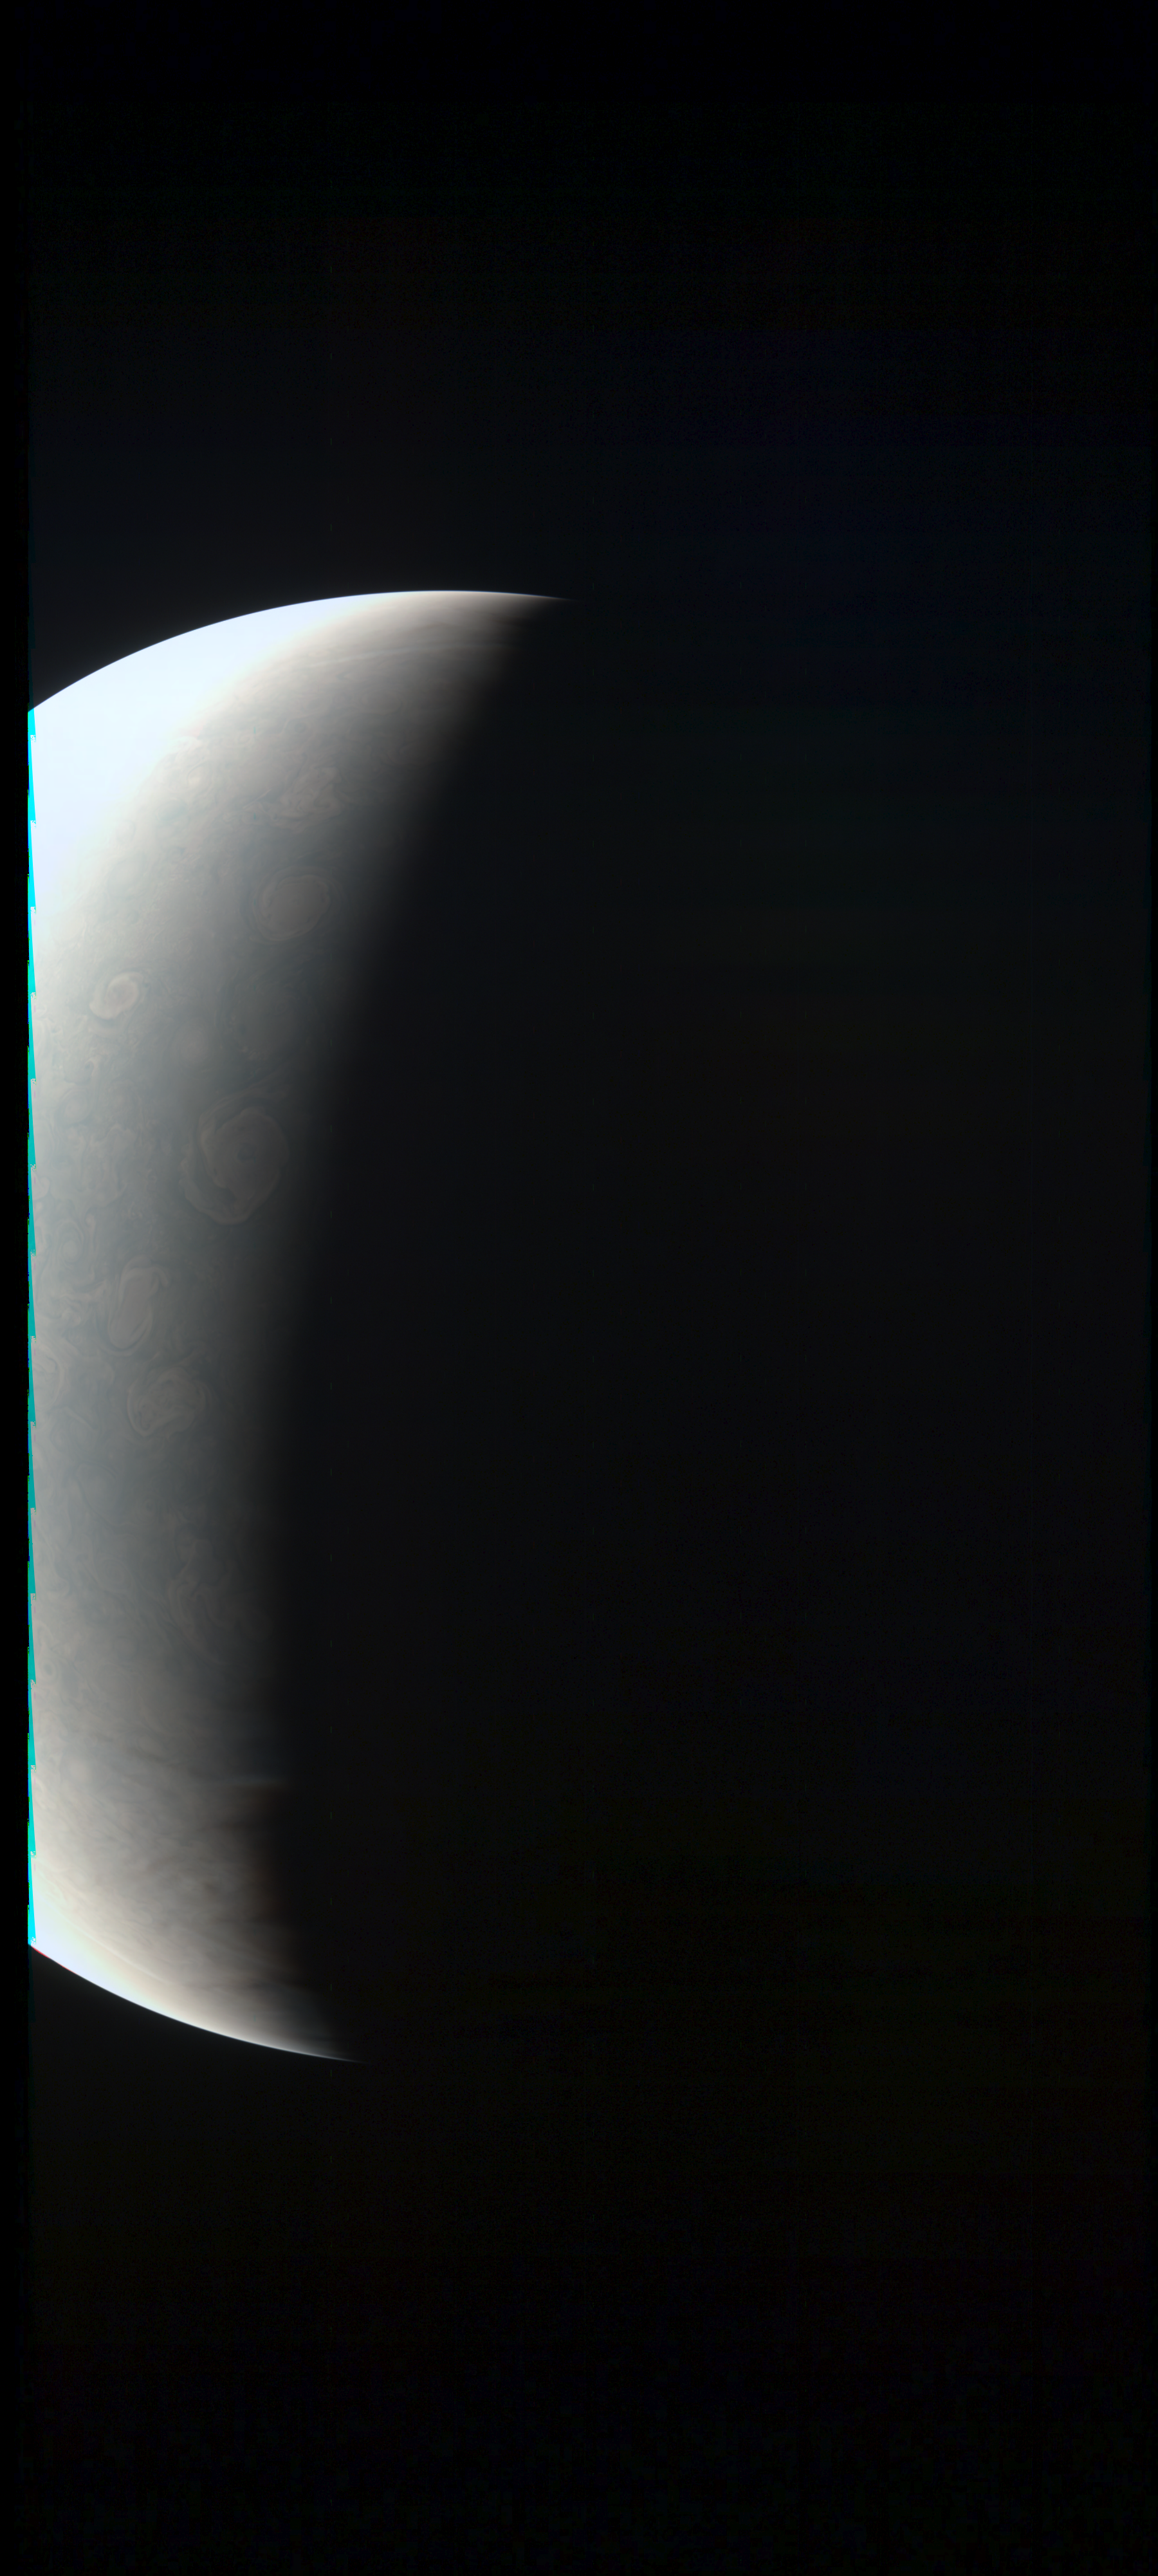 JNCE_2019043_18C00019_V01-raw_proc_hollow_sphere_c_pj_out.BMP_thumbnail_.png